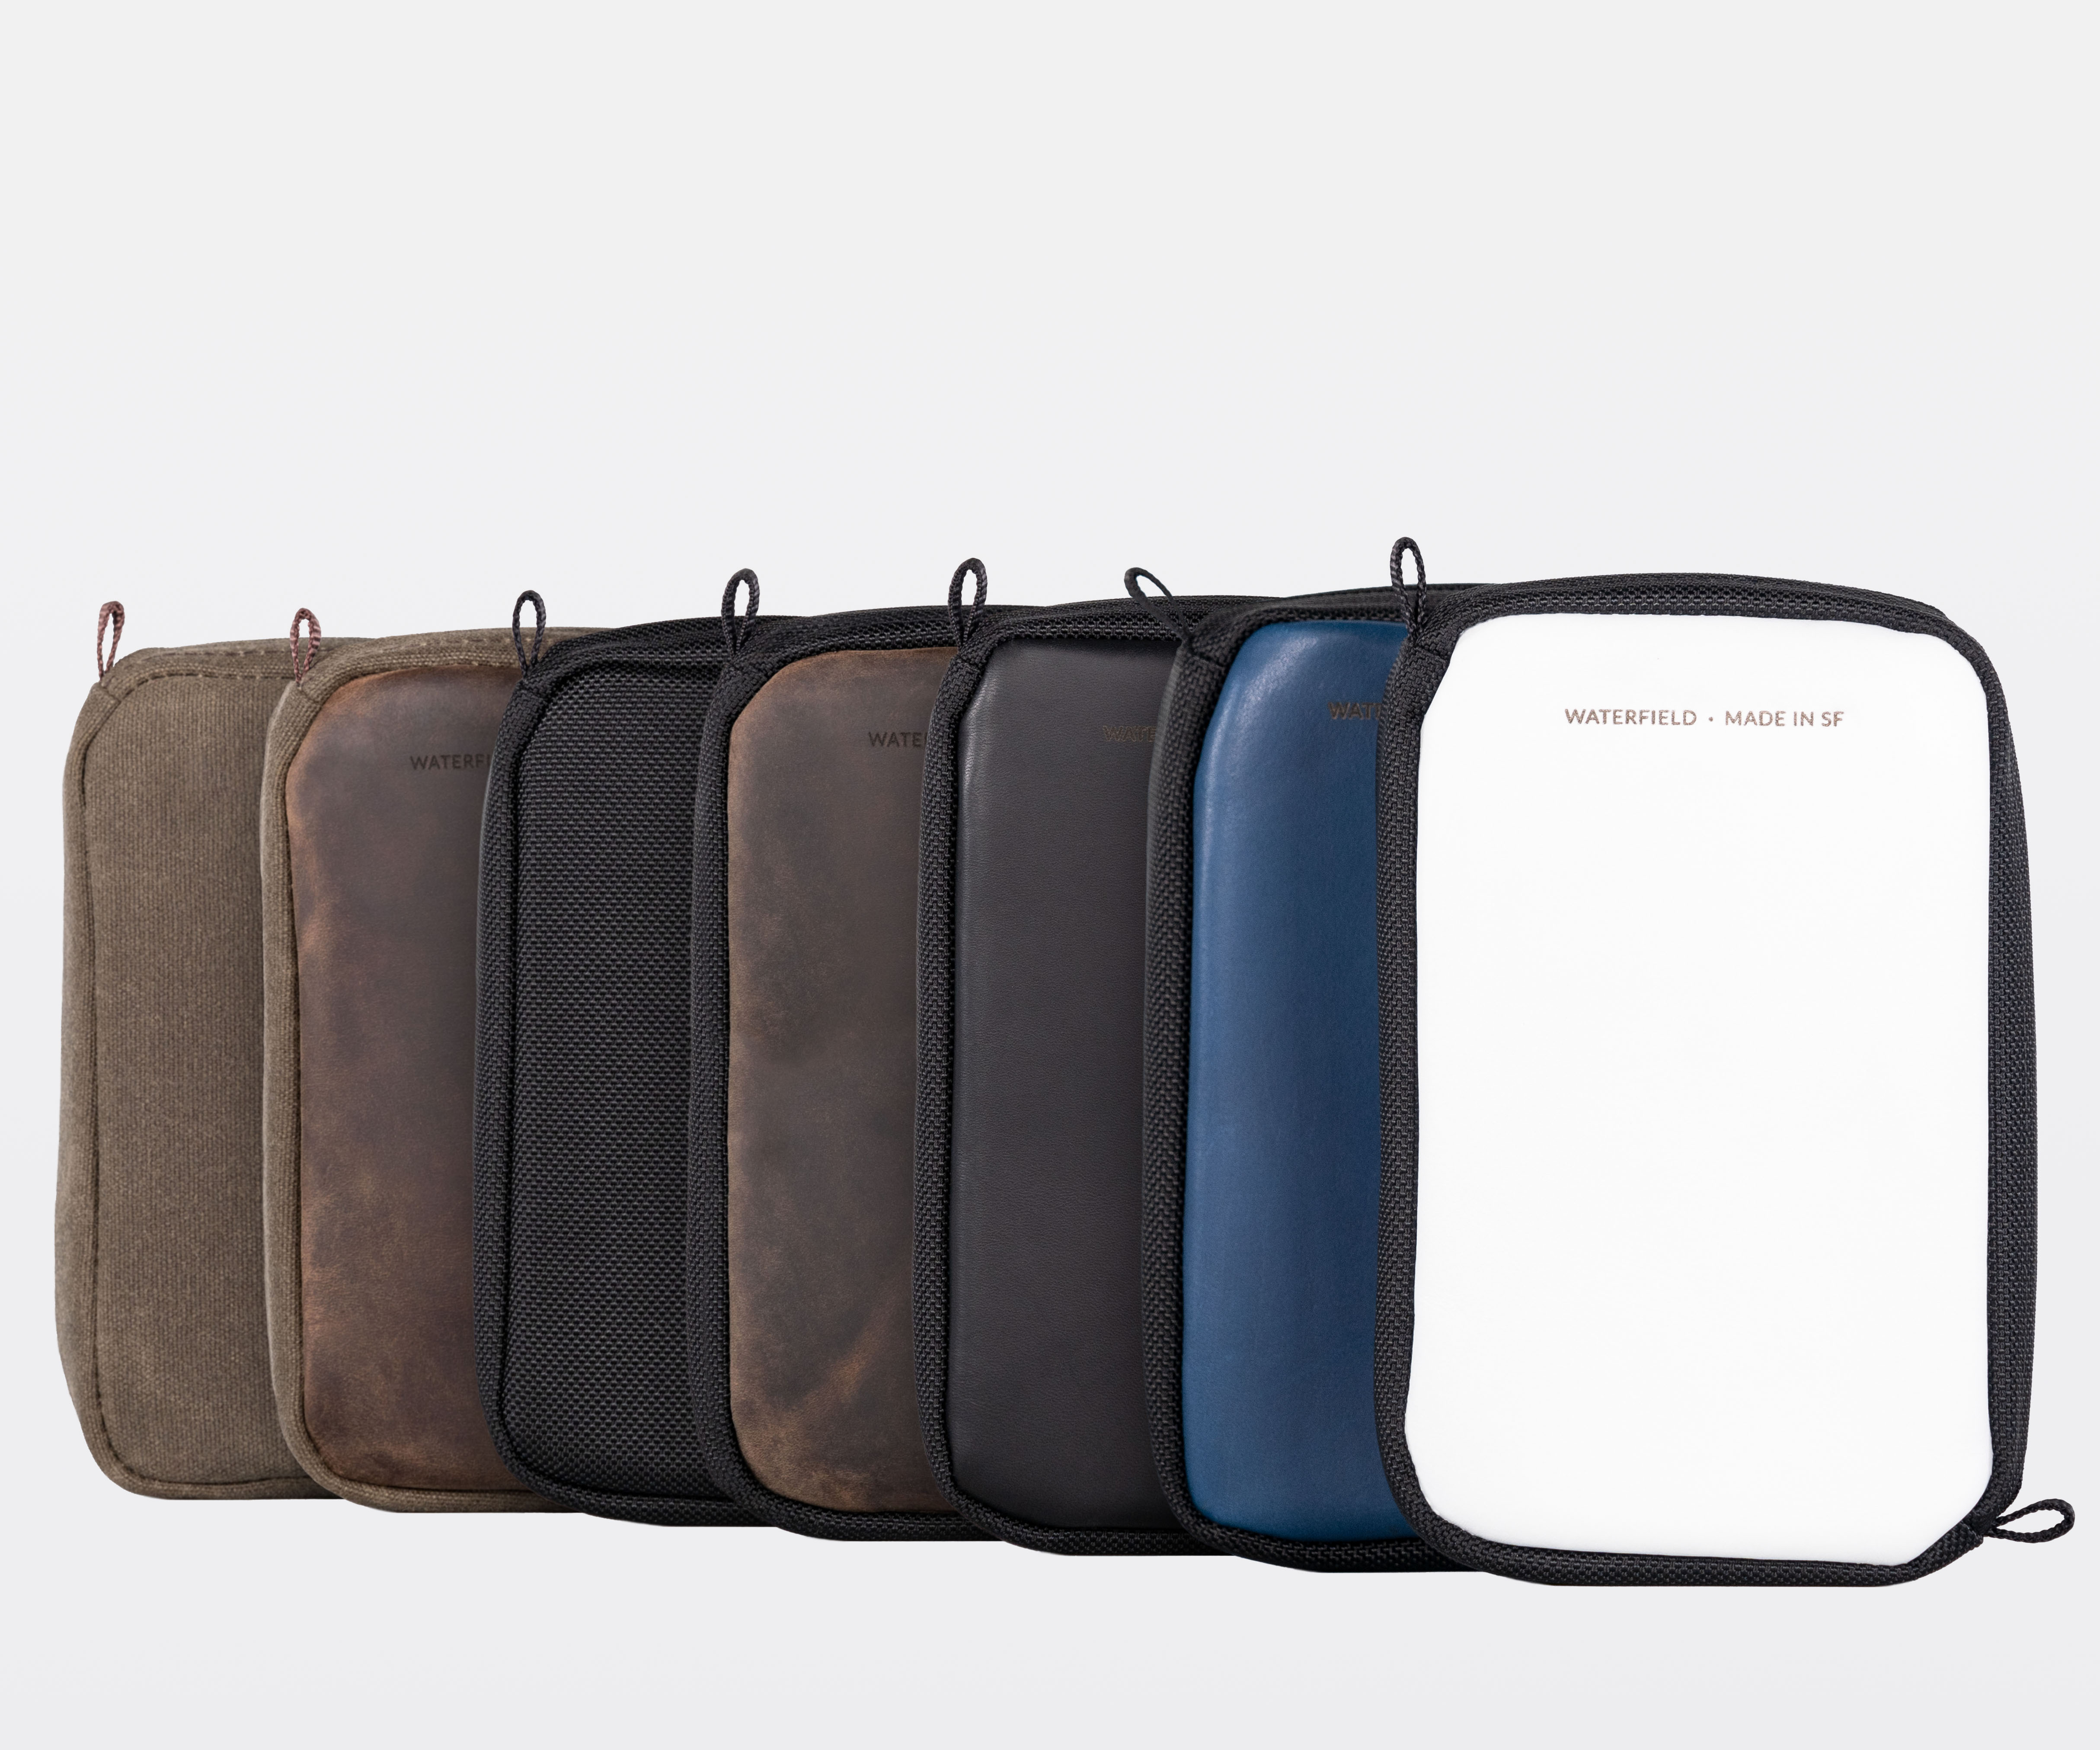 Analogue Pocket Magnetic Case colorway options